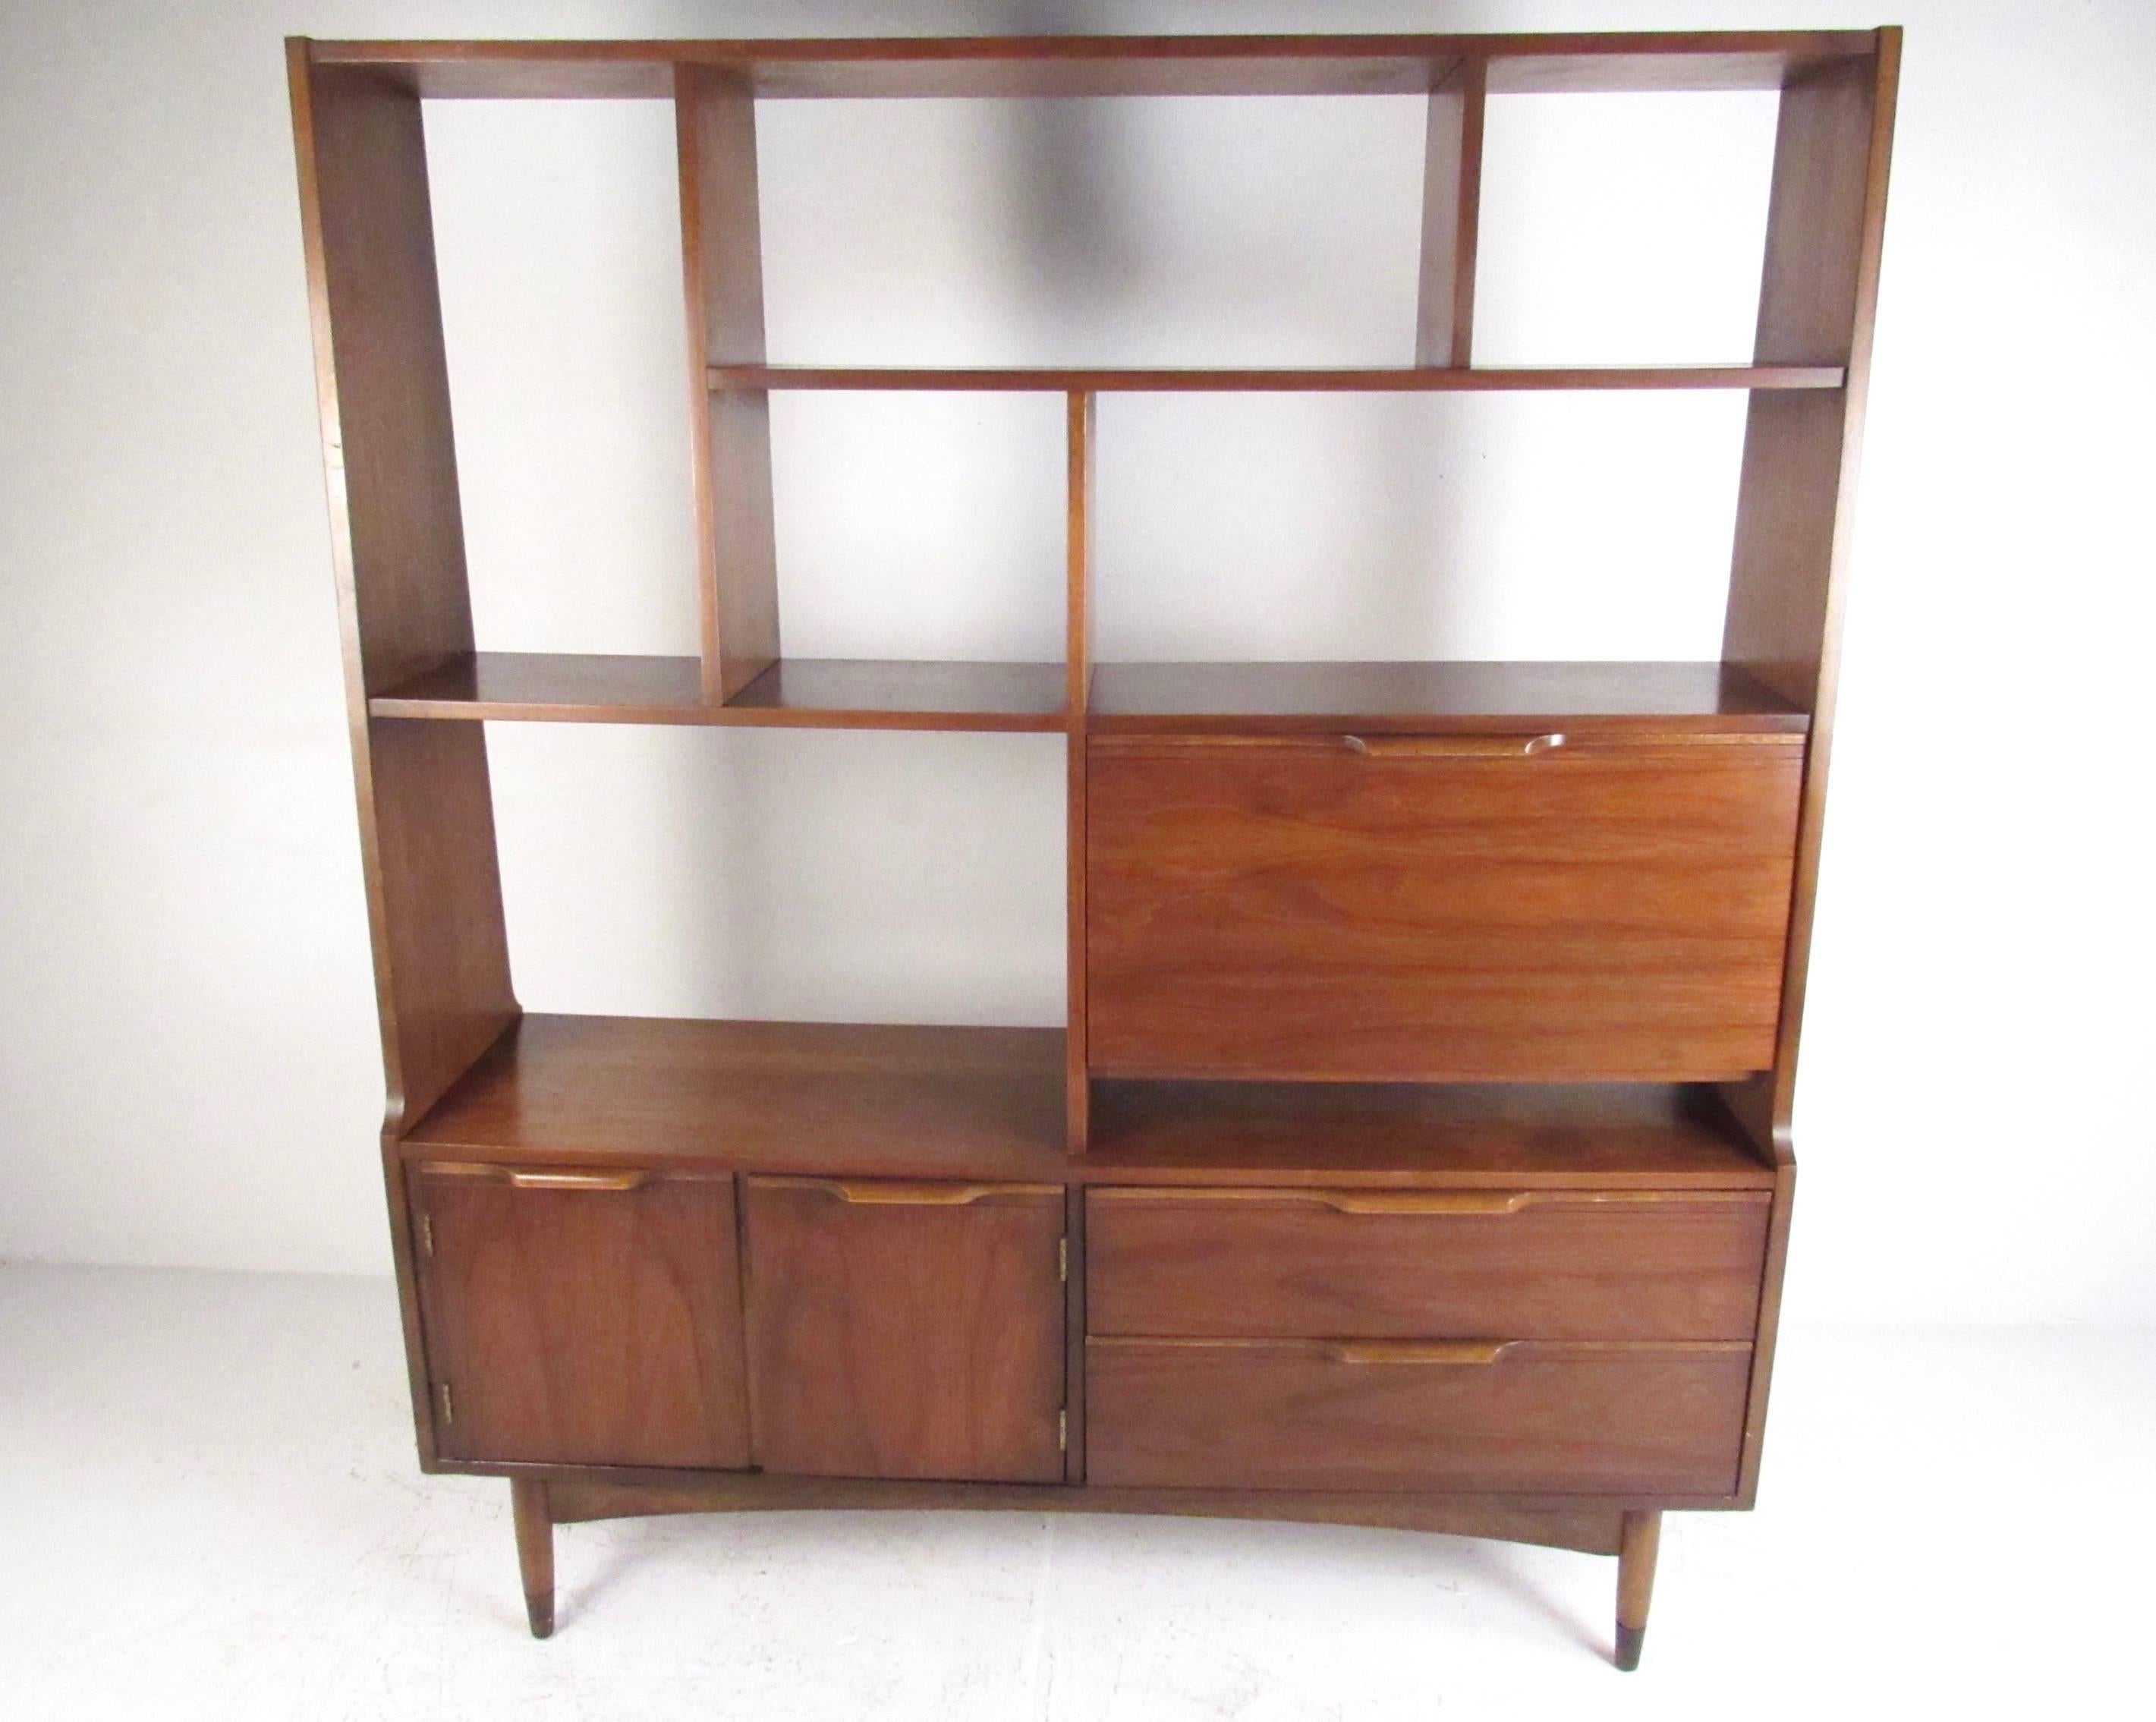 This stylish modern room divider features rich walnut finish, sculpted handles, and unique open display shelves. Tapered legs with brass sabots add to the Mid-Century Modern charm of the piece, while spacious storage cabinets and drawers make it